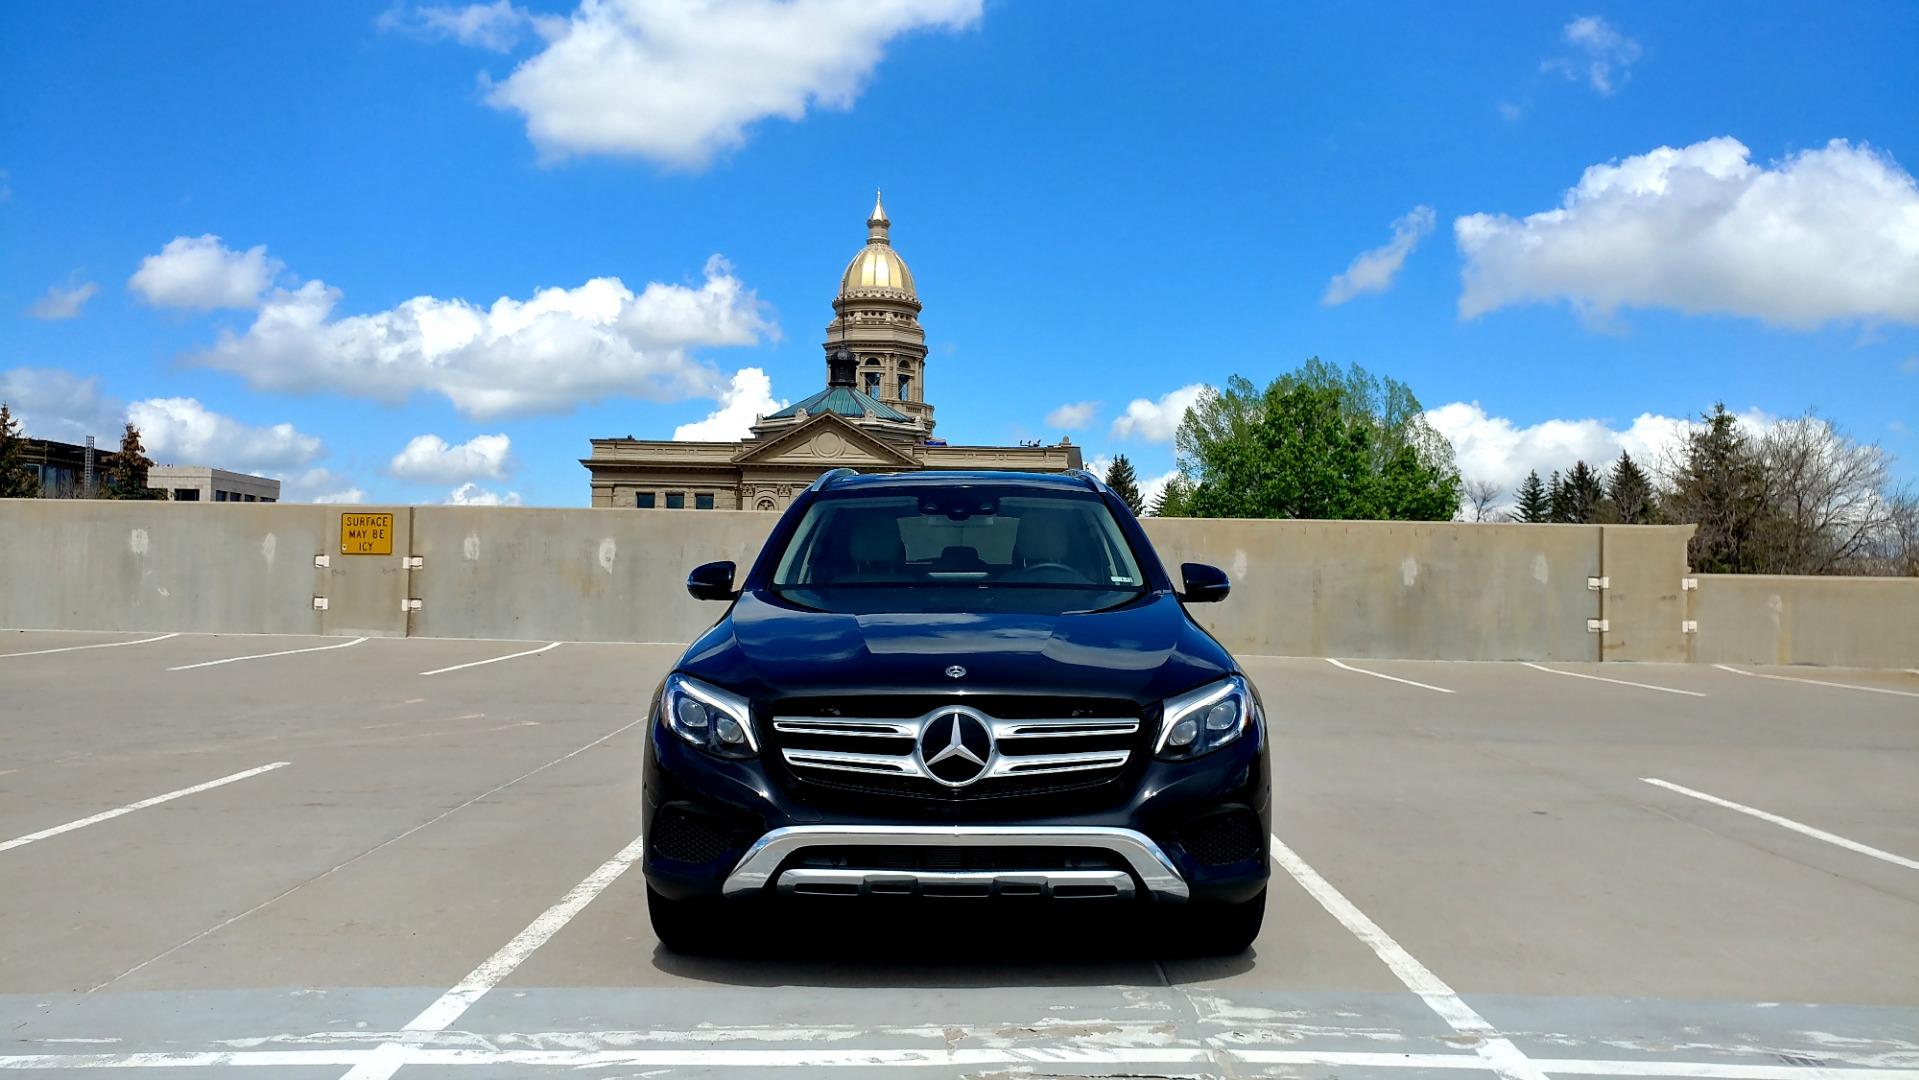 Review: 2019 Mercedes-Benz GLC 350e is a plugged-in luxury crossover